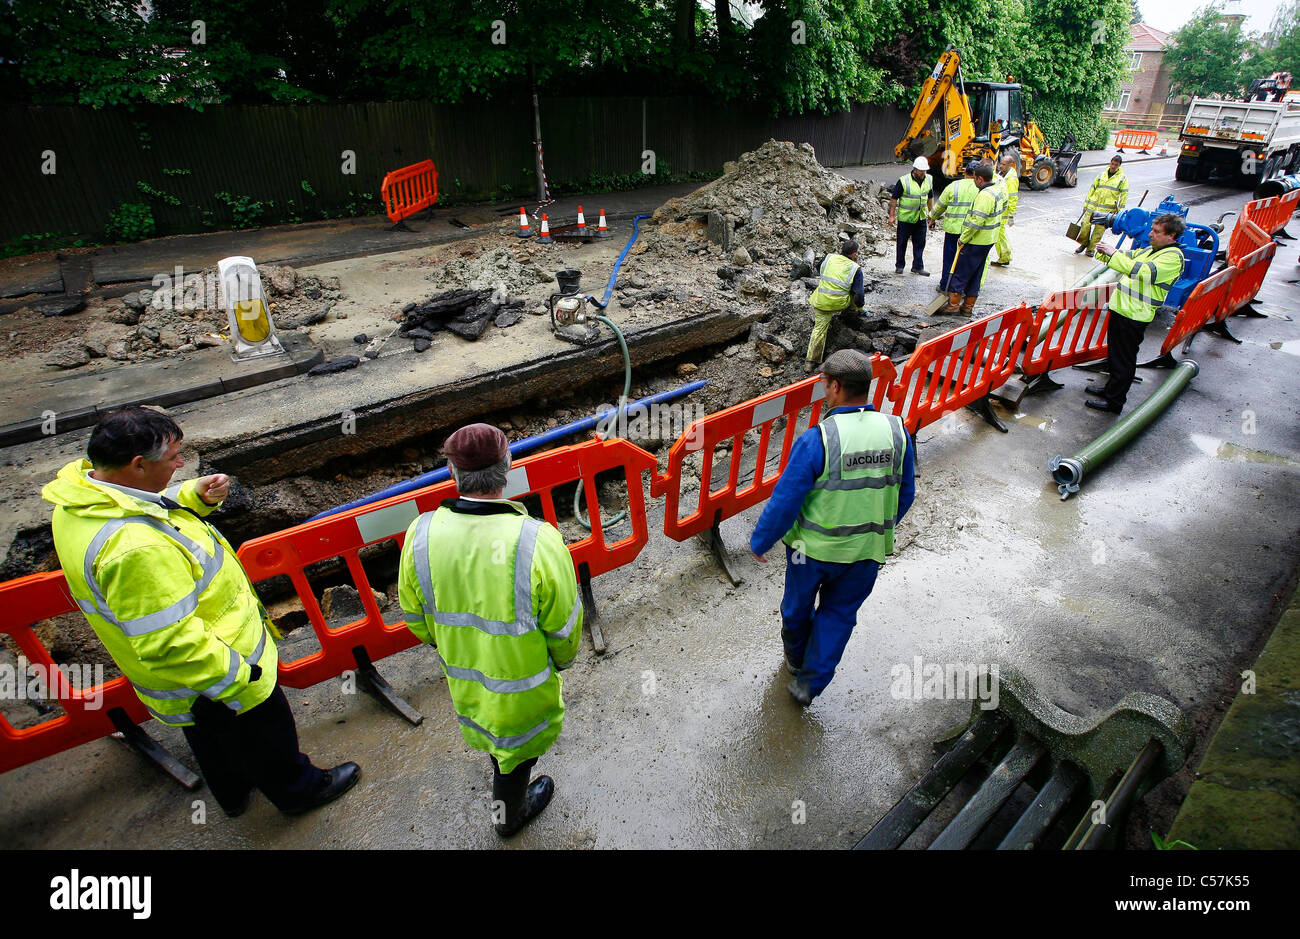 Workmen repair a burst water main in the road. Picture by James Boardman. Stock Photo